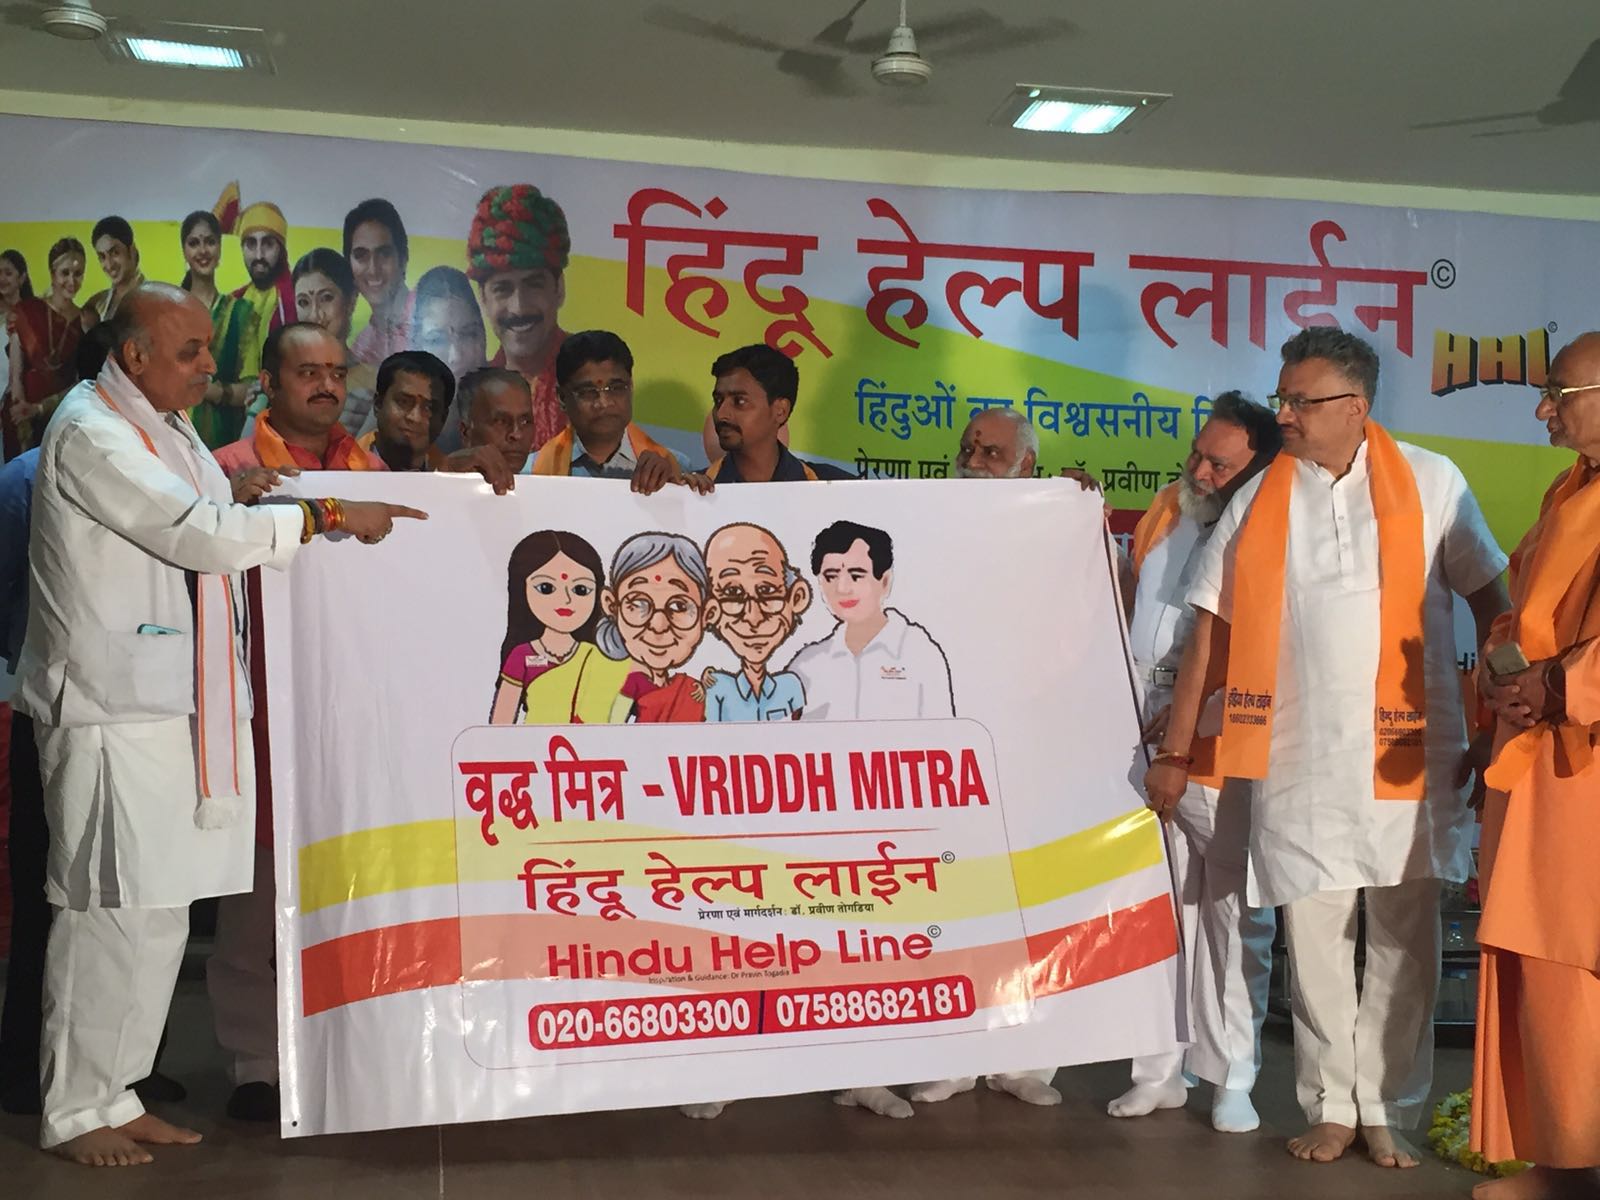 ‘VRIDDH-MITRA’ Service for Senior Citizens Launched by Hindu Help Line On 5th Anniversary